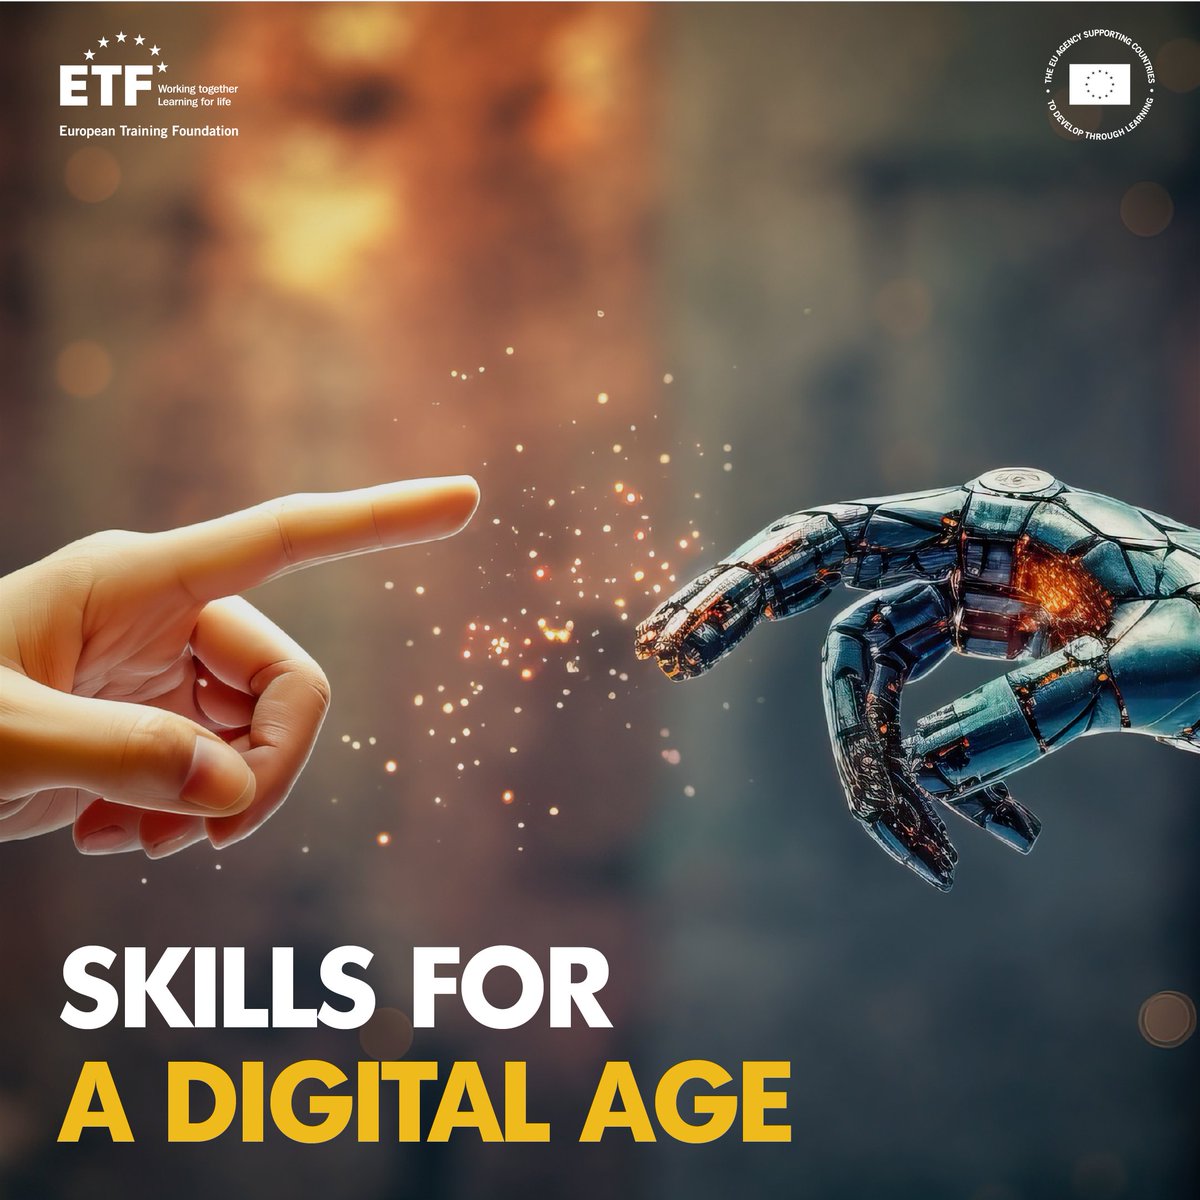 💥Ready to embrace the digital revolution?
🚩Our new campaign kicks off today, highlighting the vital role of digital skills. 
📱Join us as we explore the power of digital skills in shaping tomorrow's world!
💡Learn more europa.eu/!Rfq9kc
#Skills4Future #DigitalSkills